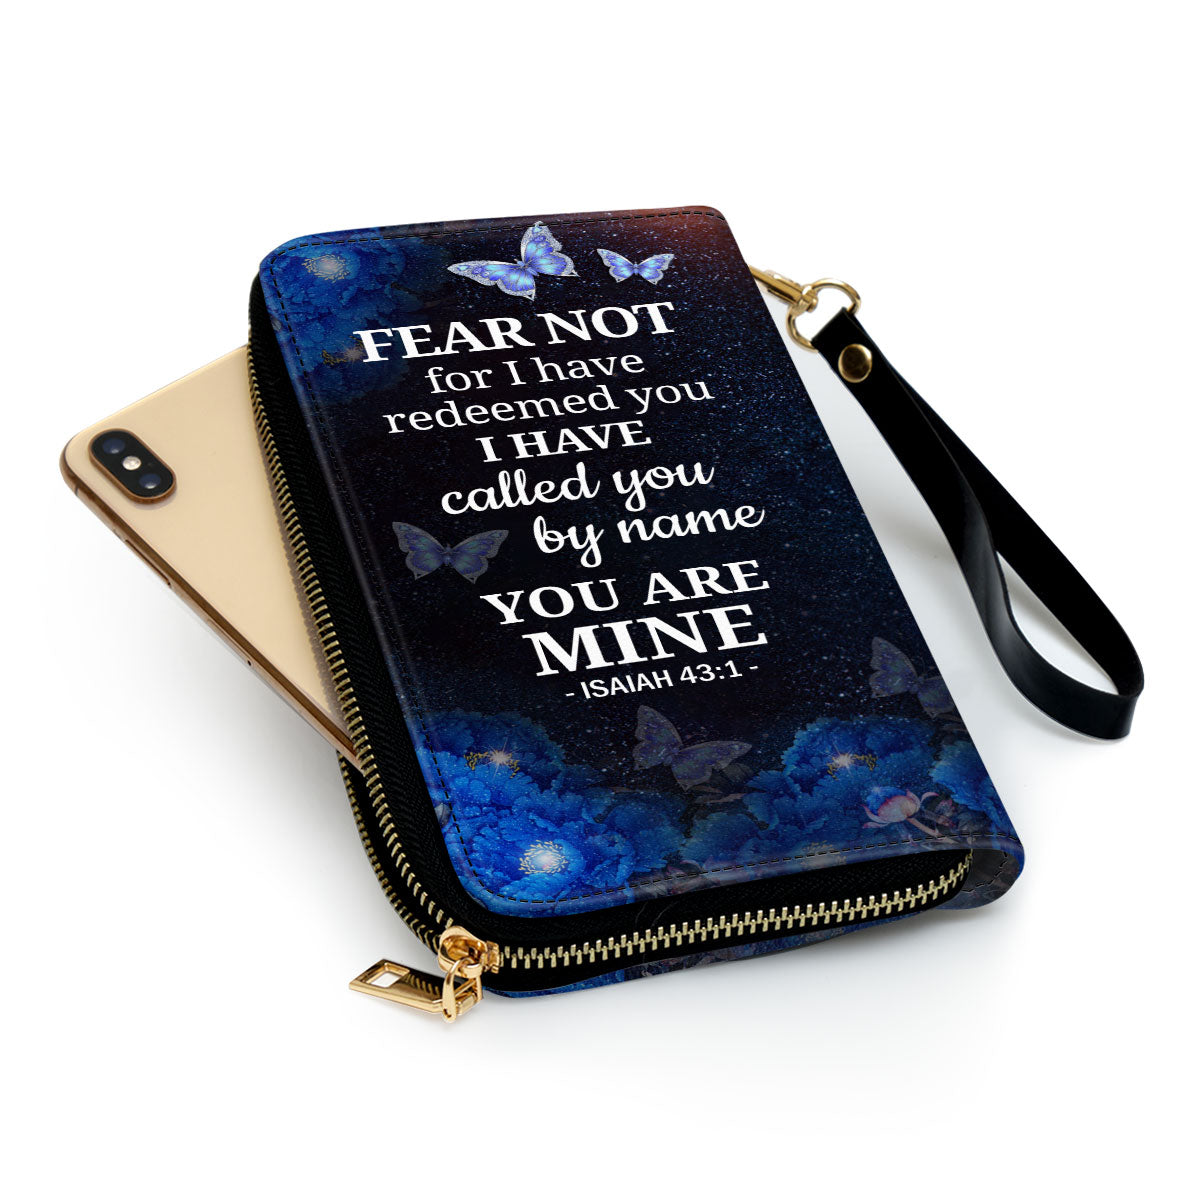 Women Clutch Purse - I Have Called You By Name Isaiah 431 Christian Gift Ideas For Religious Women Personalized Zippered Leather Clutch Purse